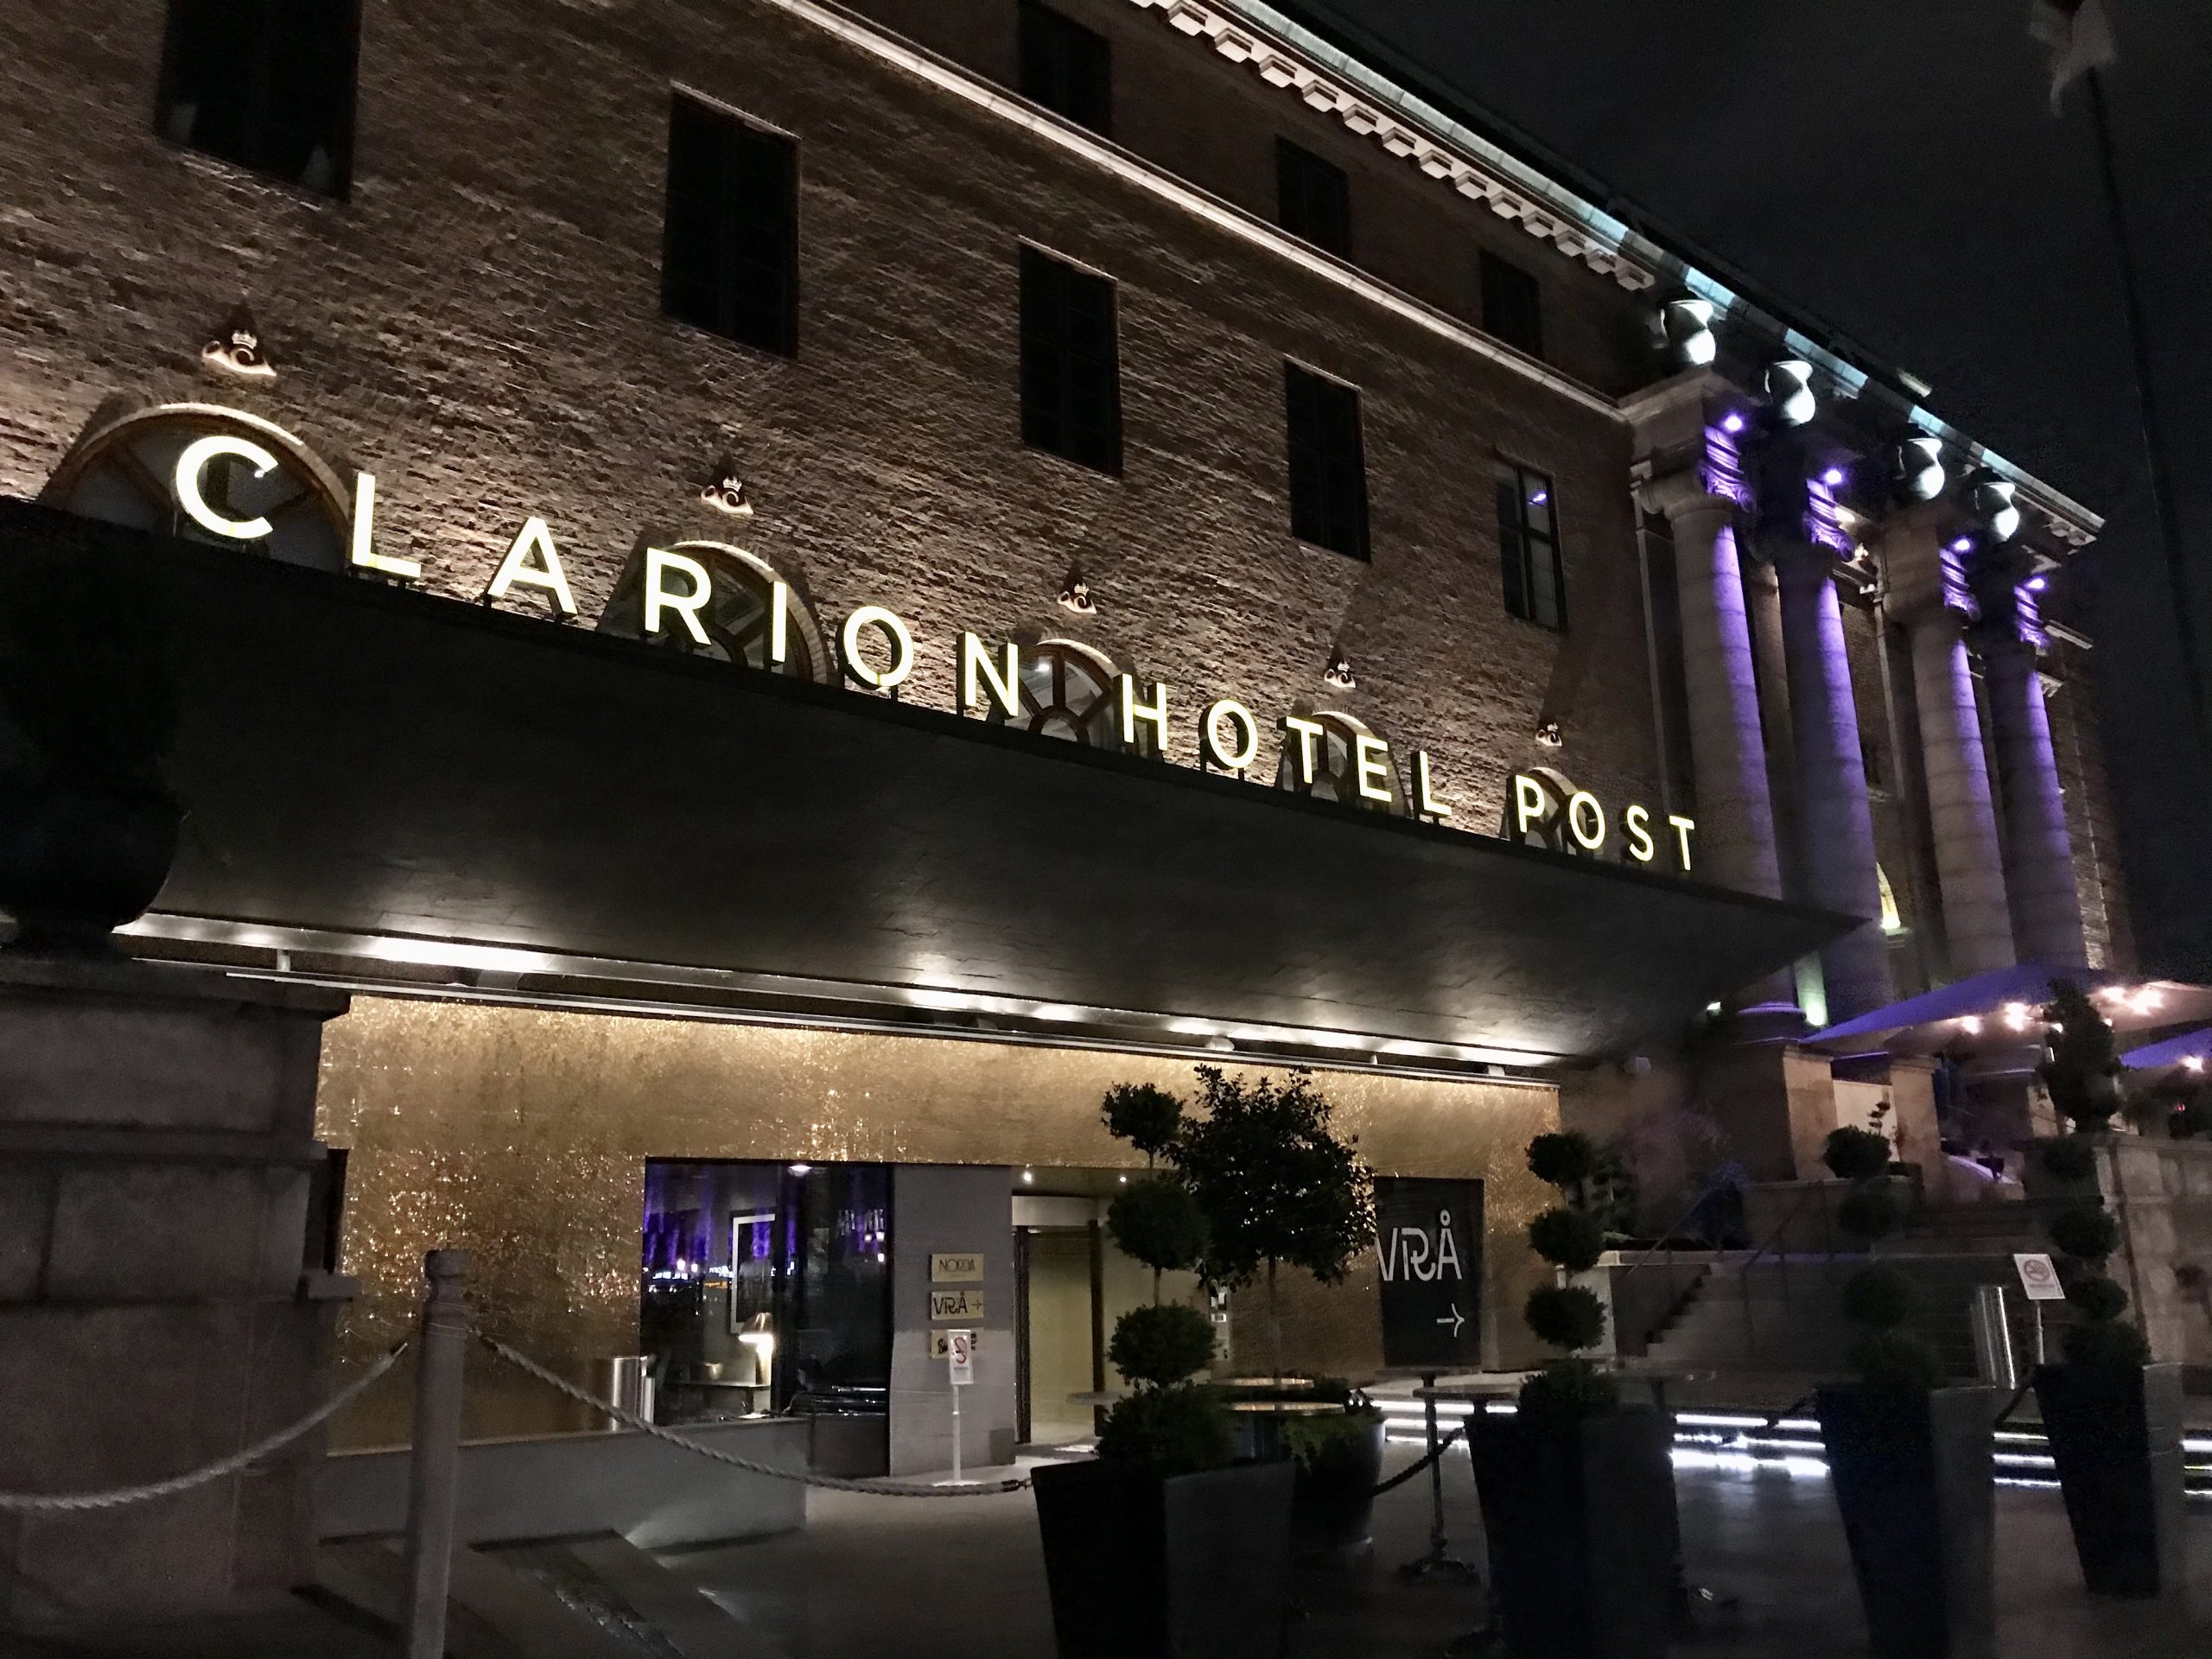 Clarion Hotel Post